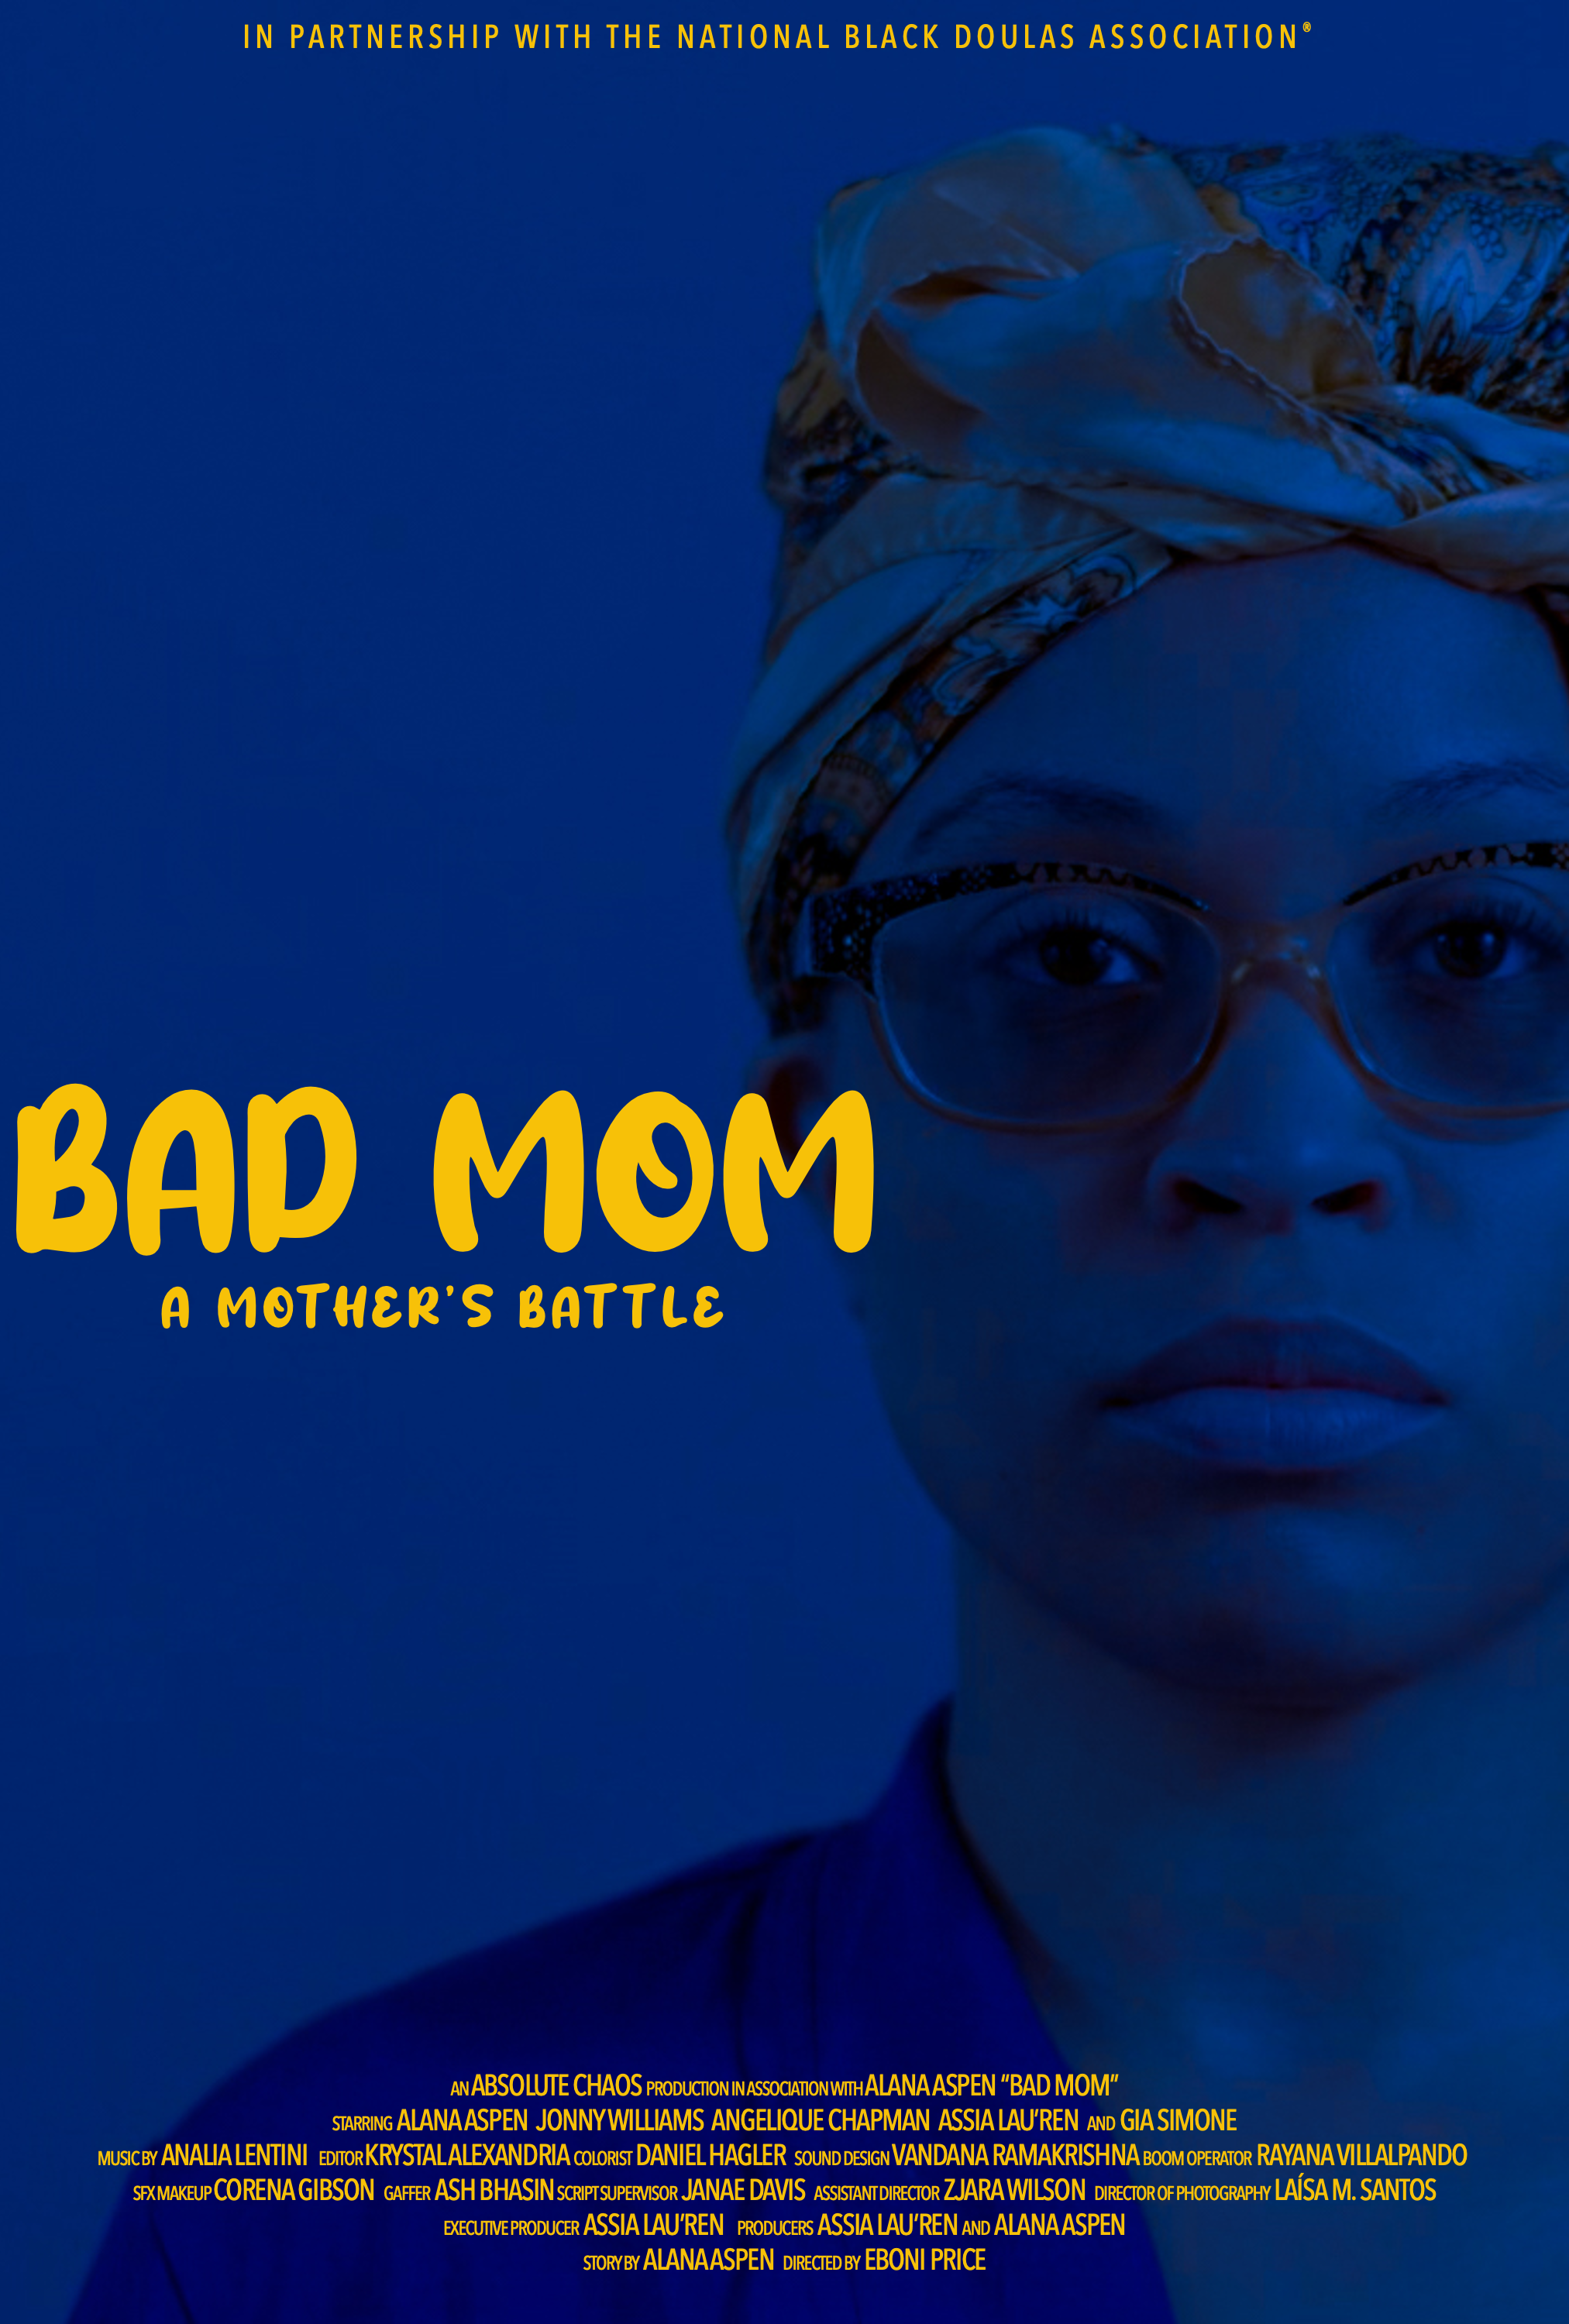 BAD MOM Poster 27x40 (1).png